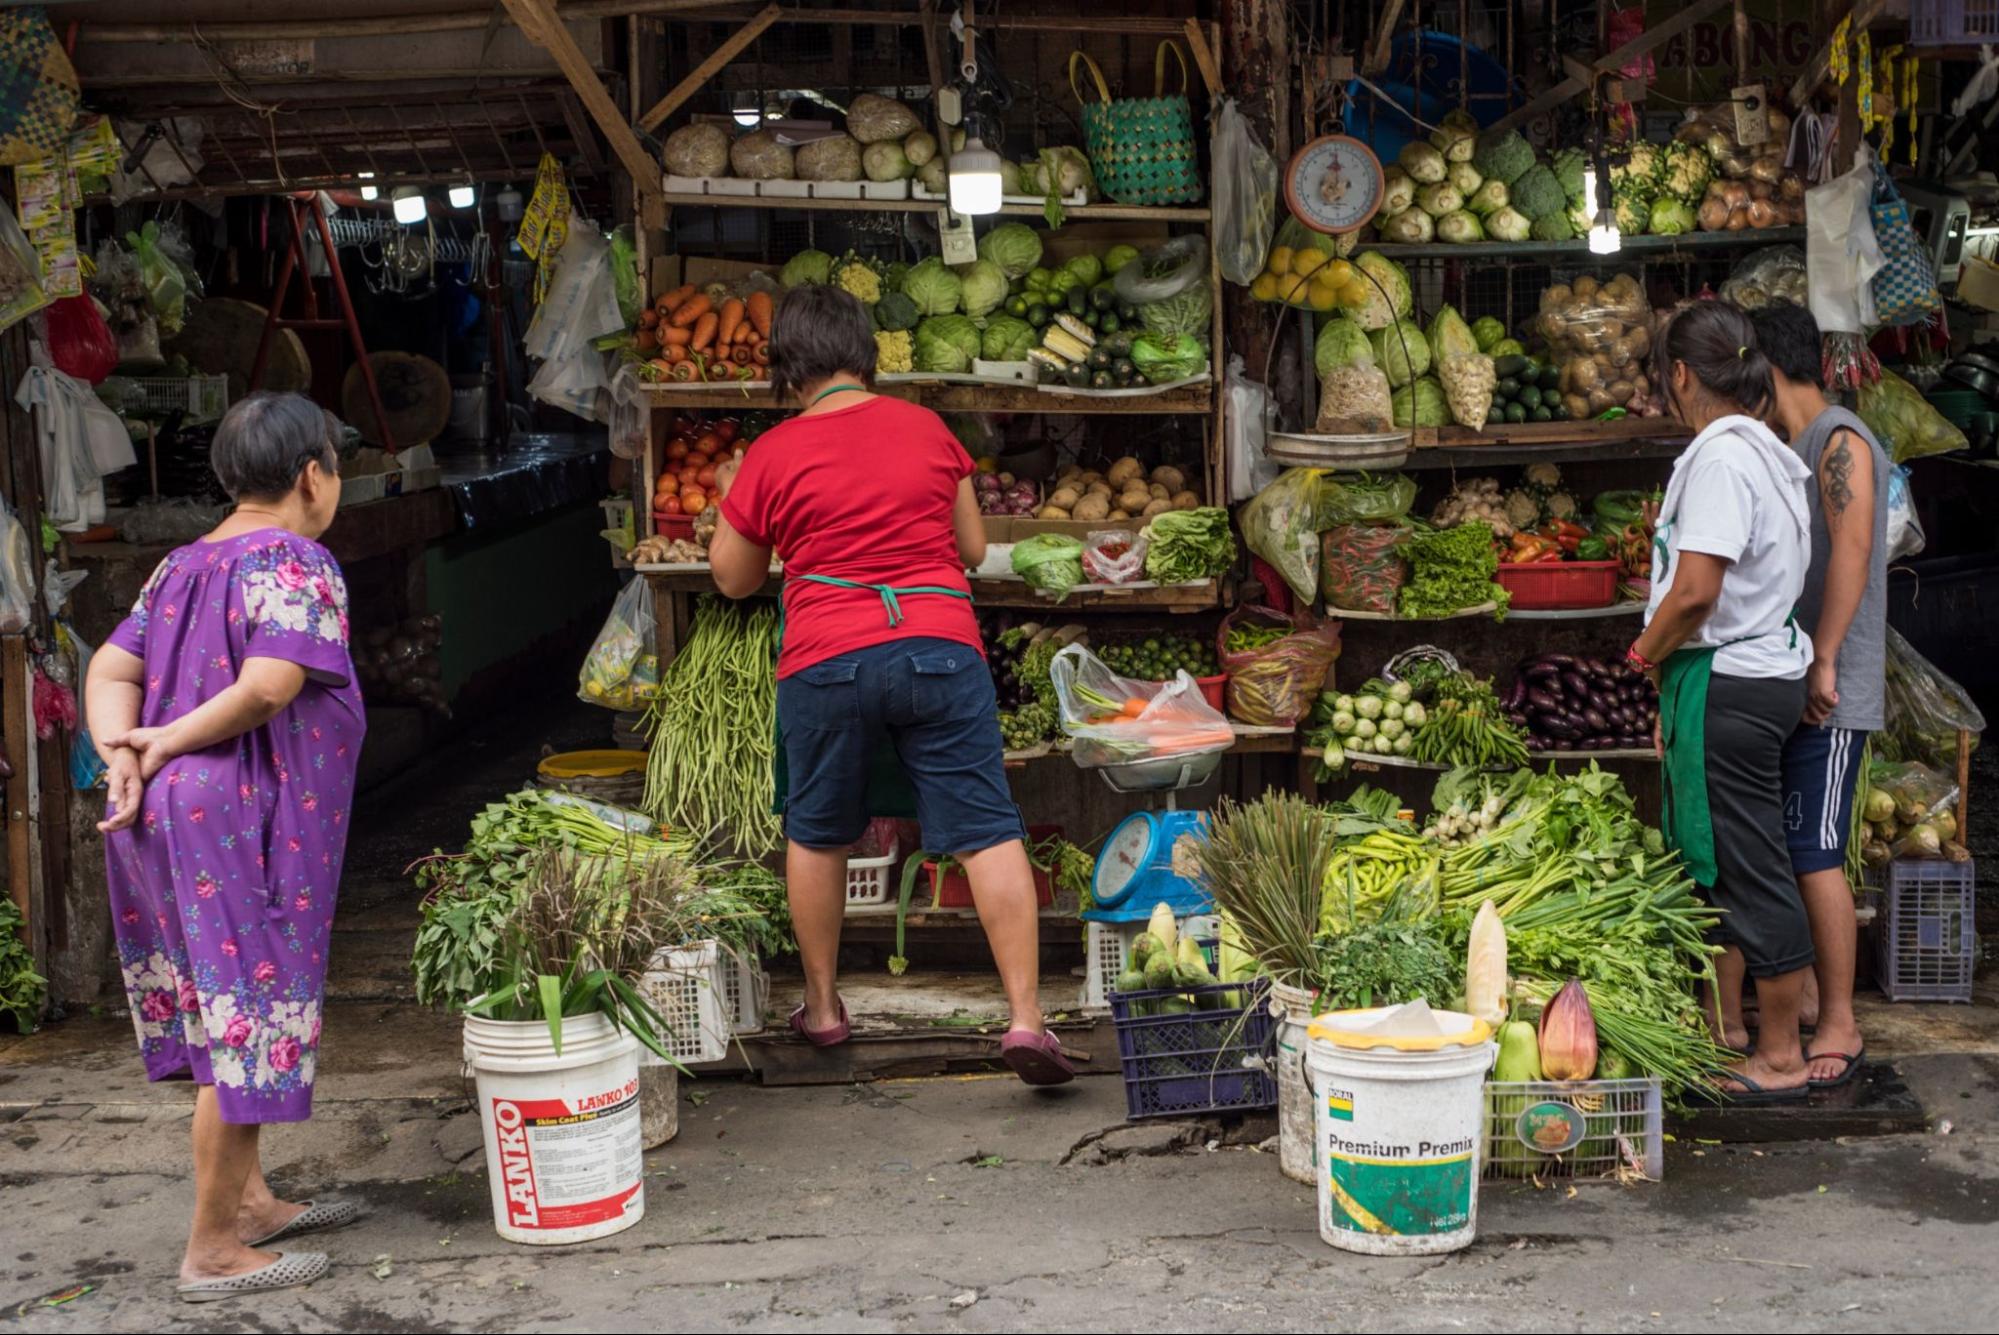 Customers buy fruits and vegetables in a street grocery shop in Manila